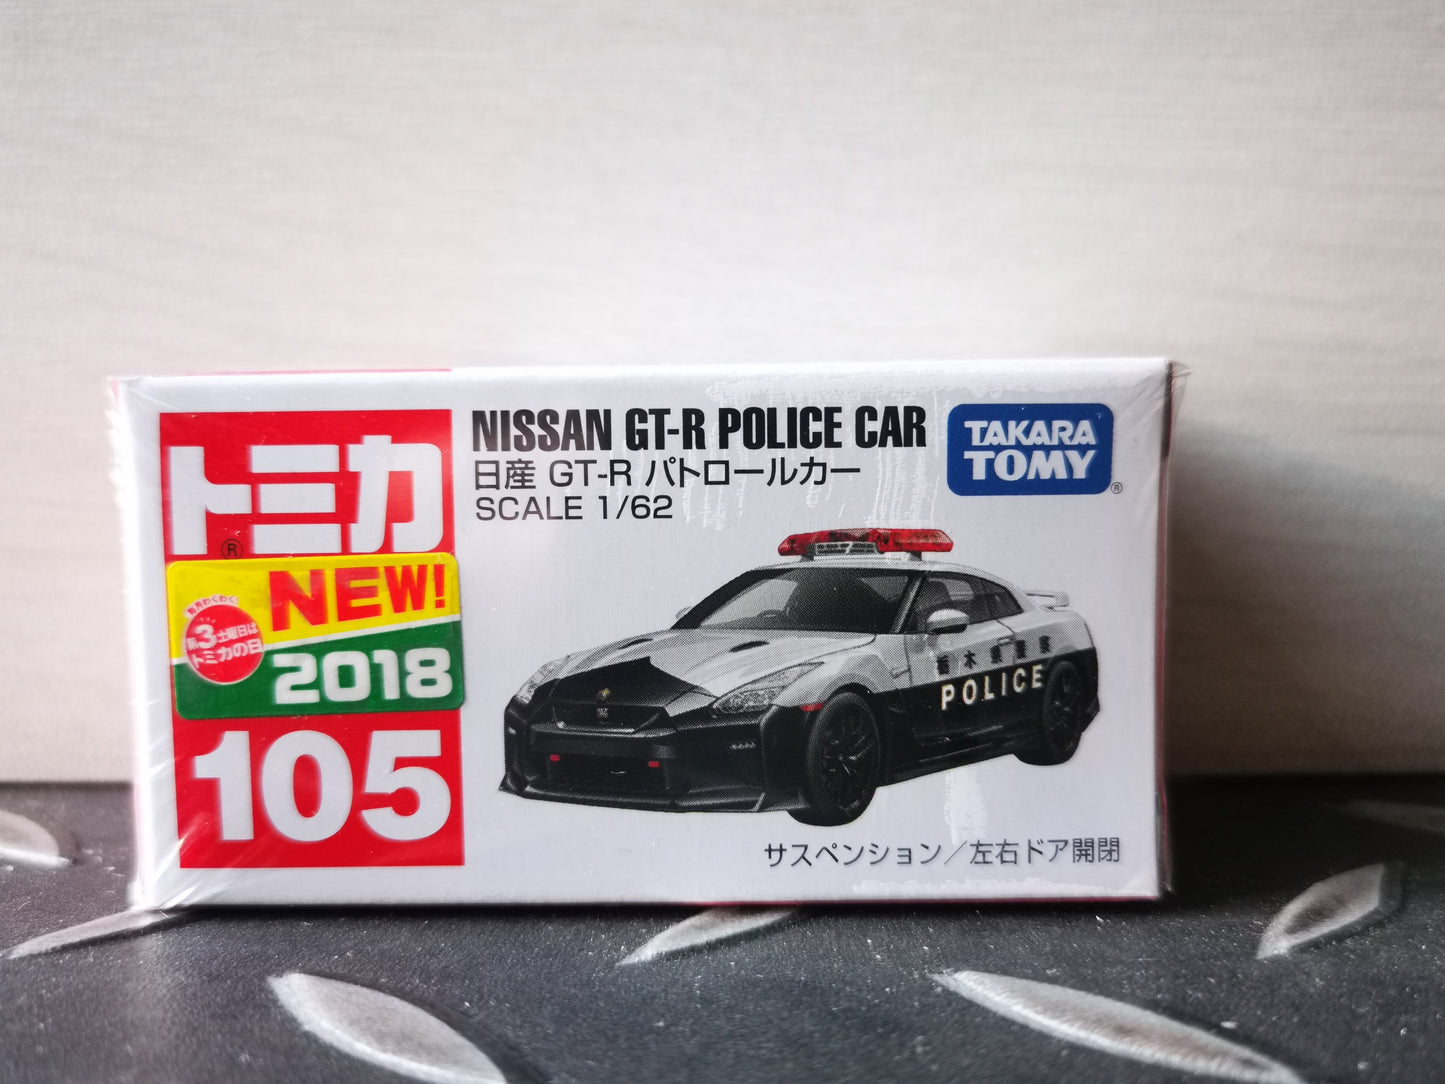 Tomica #105 Nissan GT-R Police Car 1:62 Scale